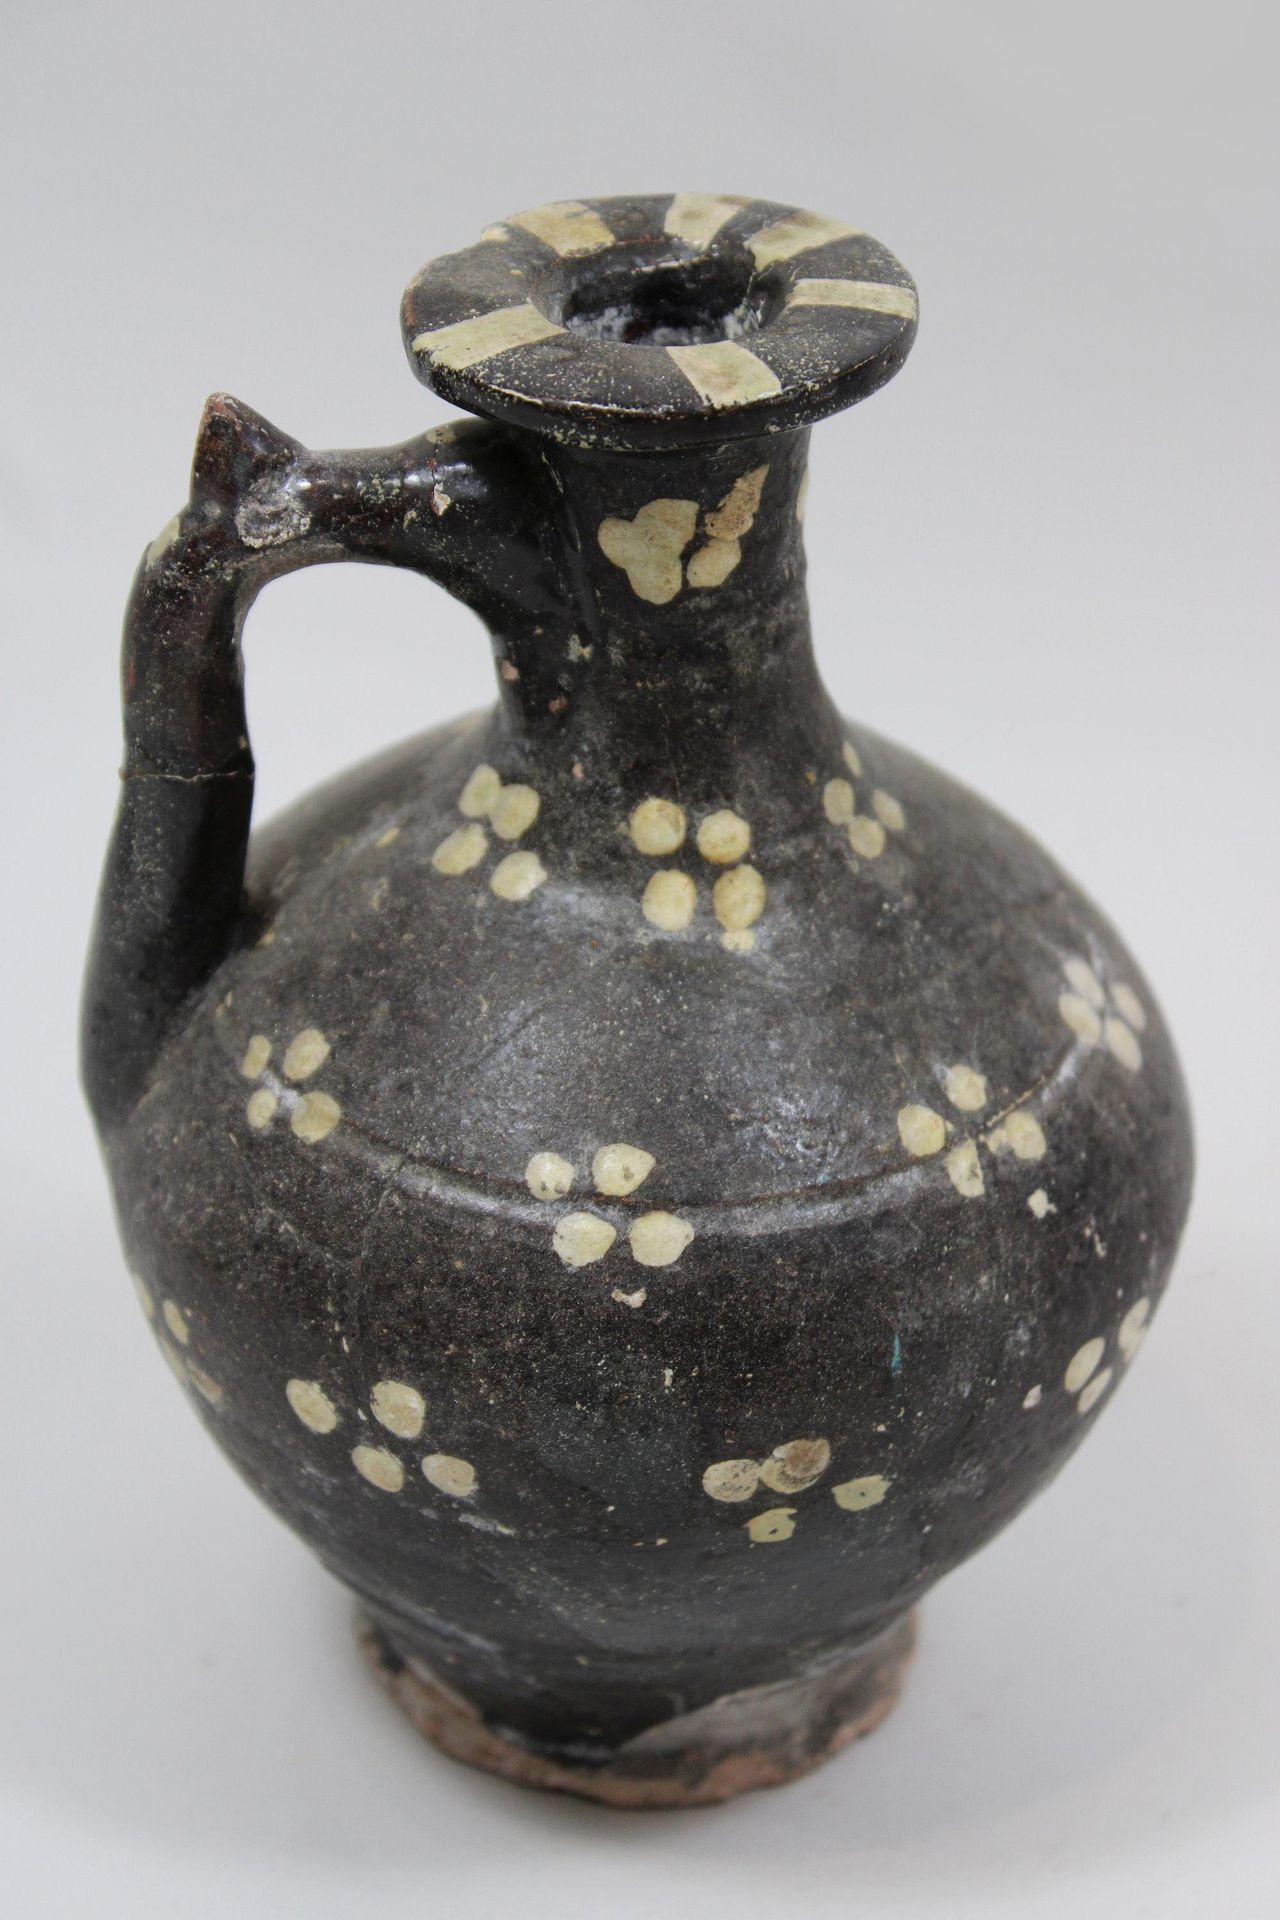 Krug, persisch, 12.-14. Jh. Jug, excavation, Persian, 12th-14th c., light clay, &hellip;